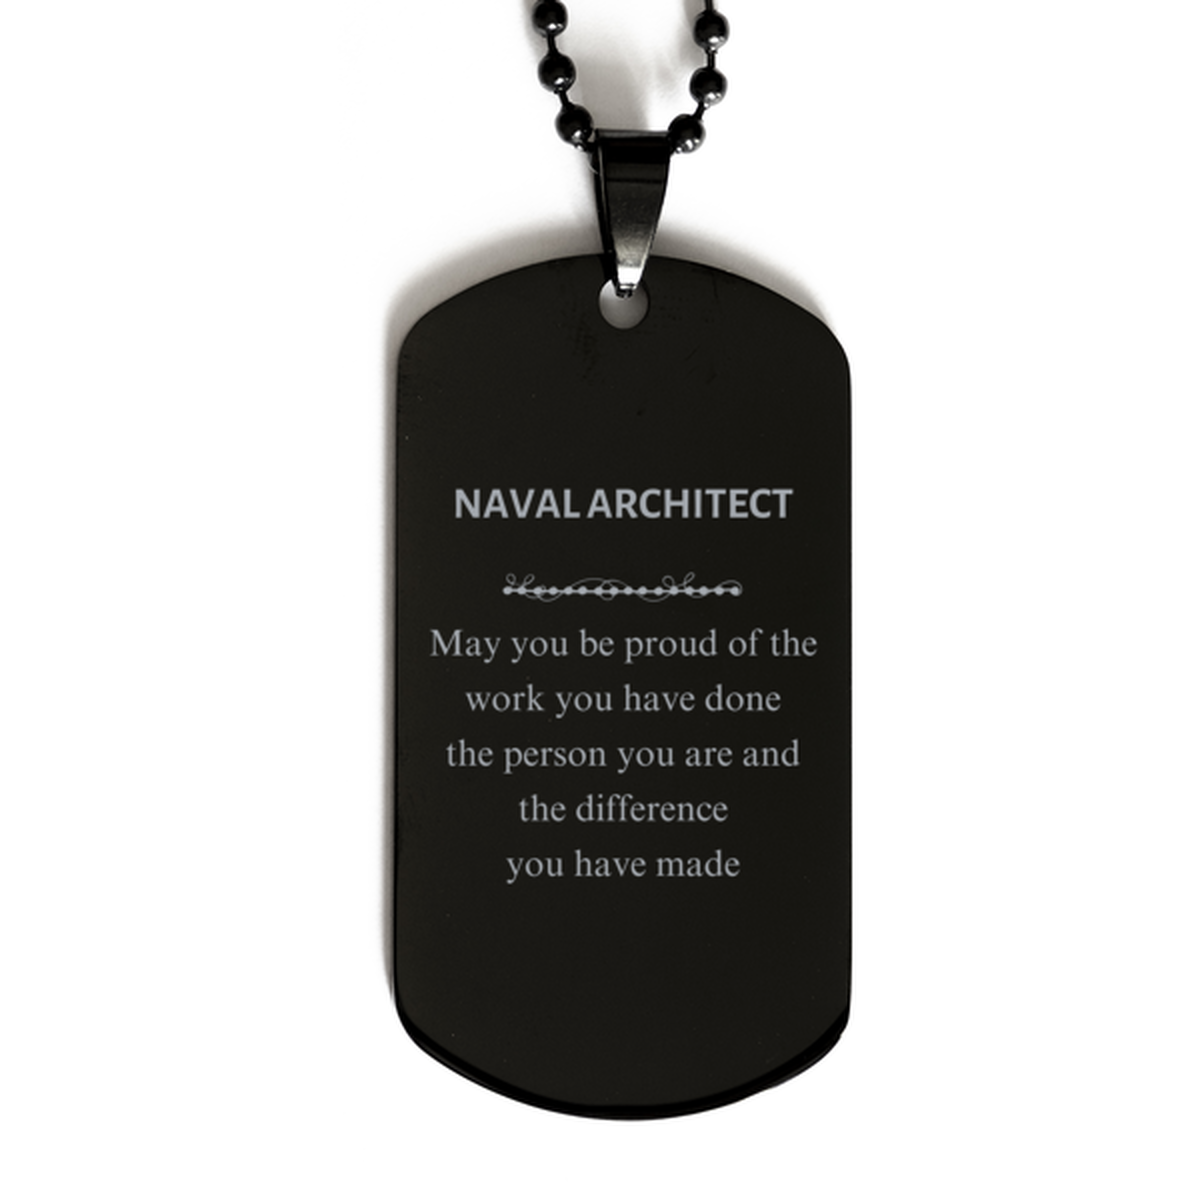 Naval Architect May you be proud of the work you have done, Retirement Naval Architect Black Dog Tag for Colleague Appreciation Gifts Amazing for Naval Architect